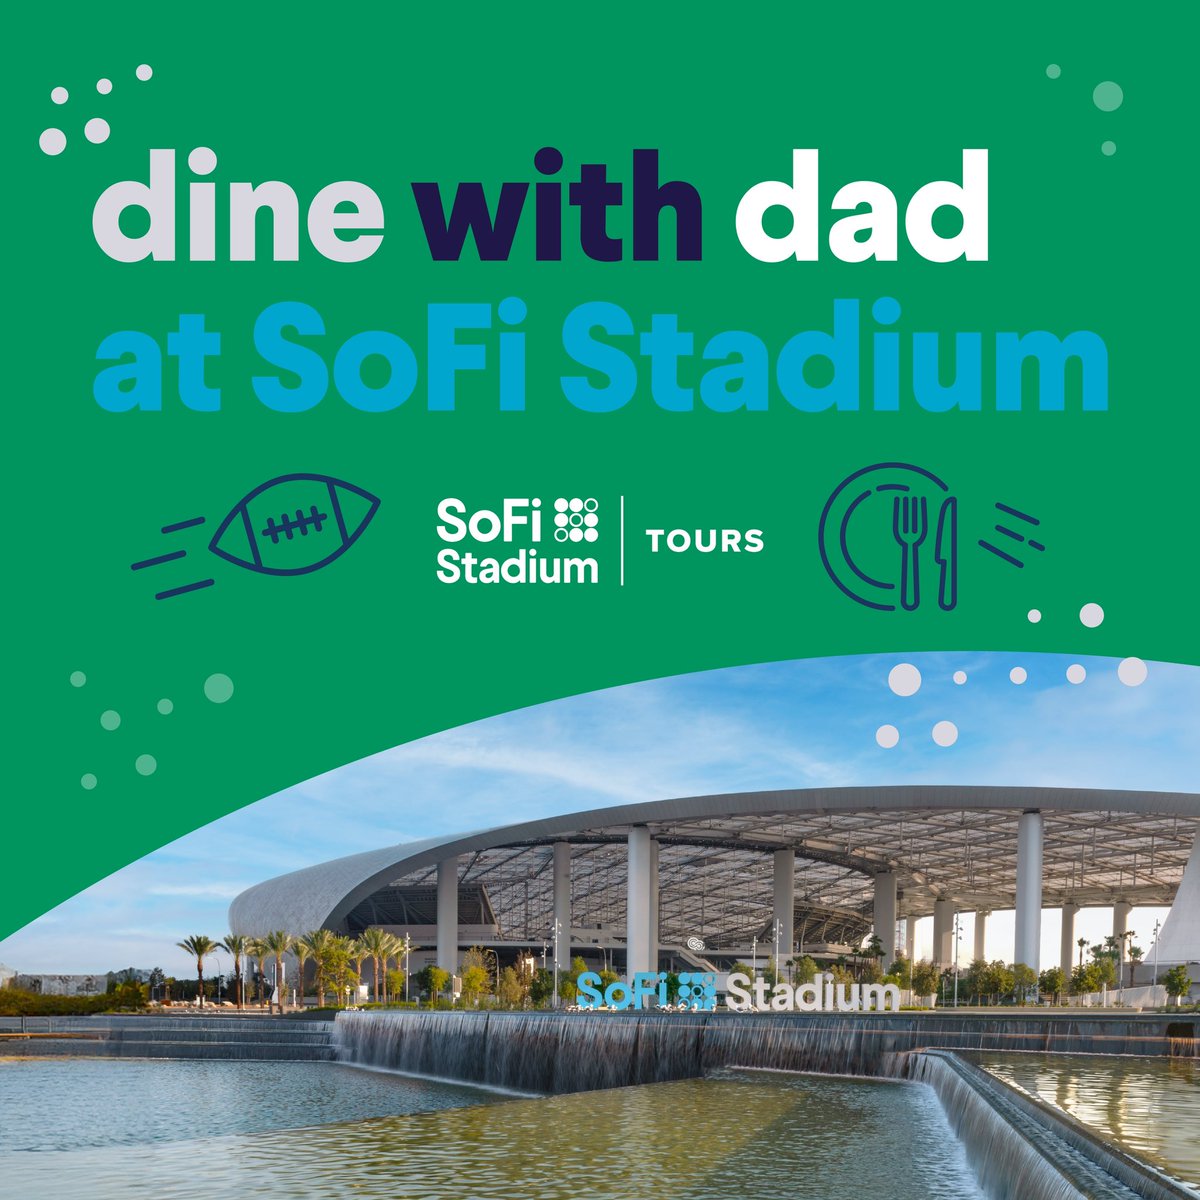 Dine with Dad at #SoFiStadium this Father's Day 🏟️ Enjoy a brunch buffet and behind-the-scenes tour of SoFi Stadium! Upgrade your experience by adding on the NFL Experience for a tour of the league's West Coast Headquarters 🏈 

🎟️: bit.ly/FathersDay24TW